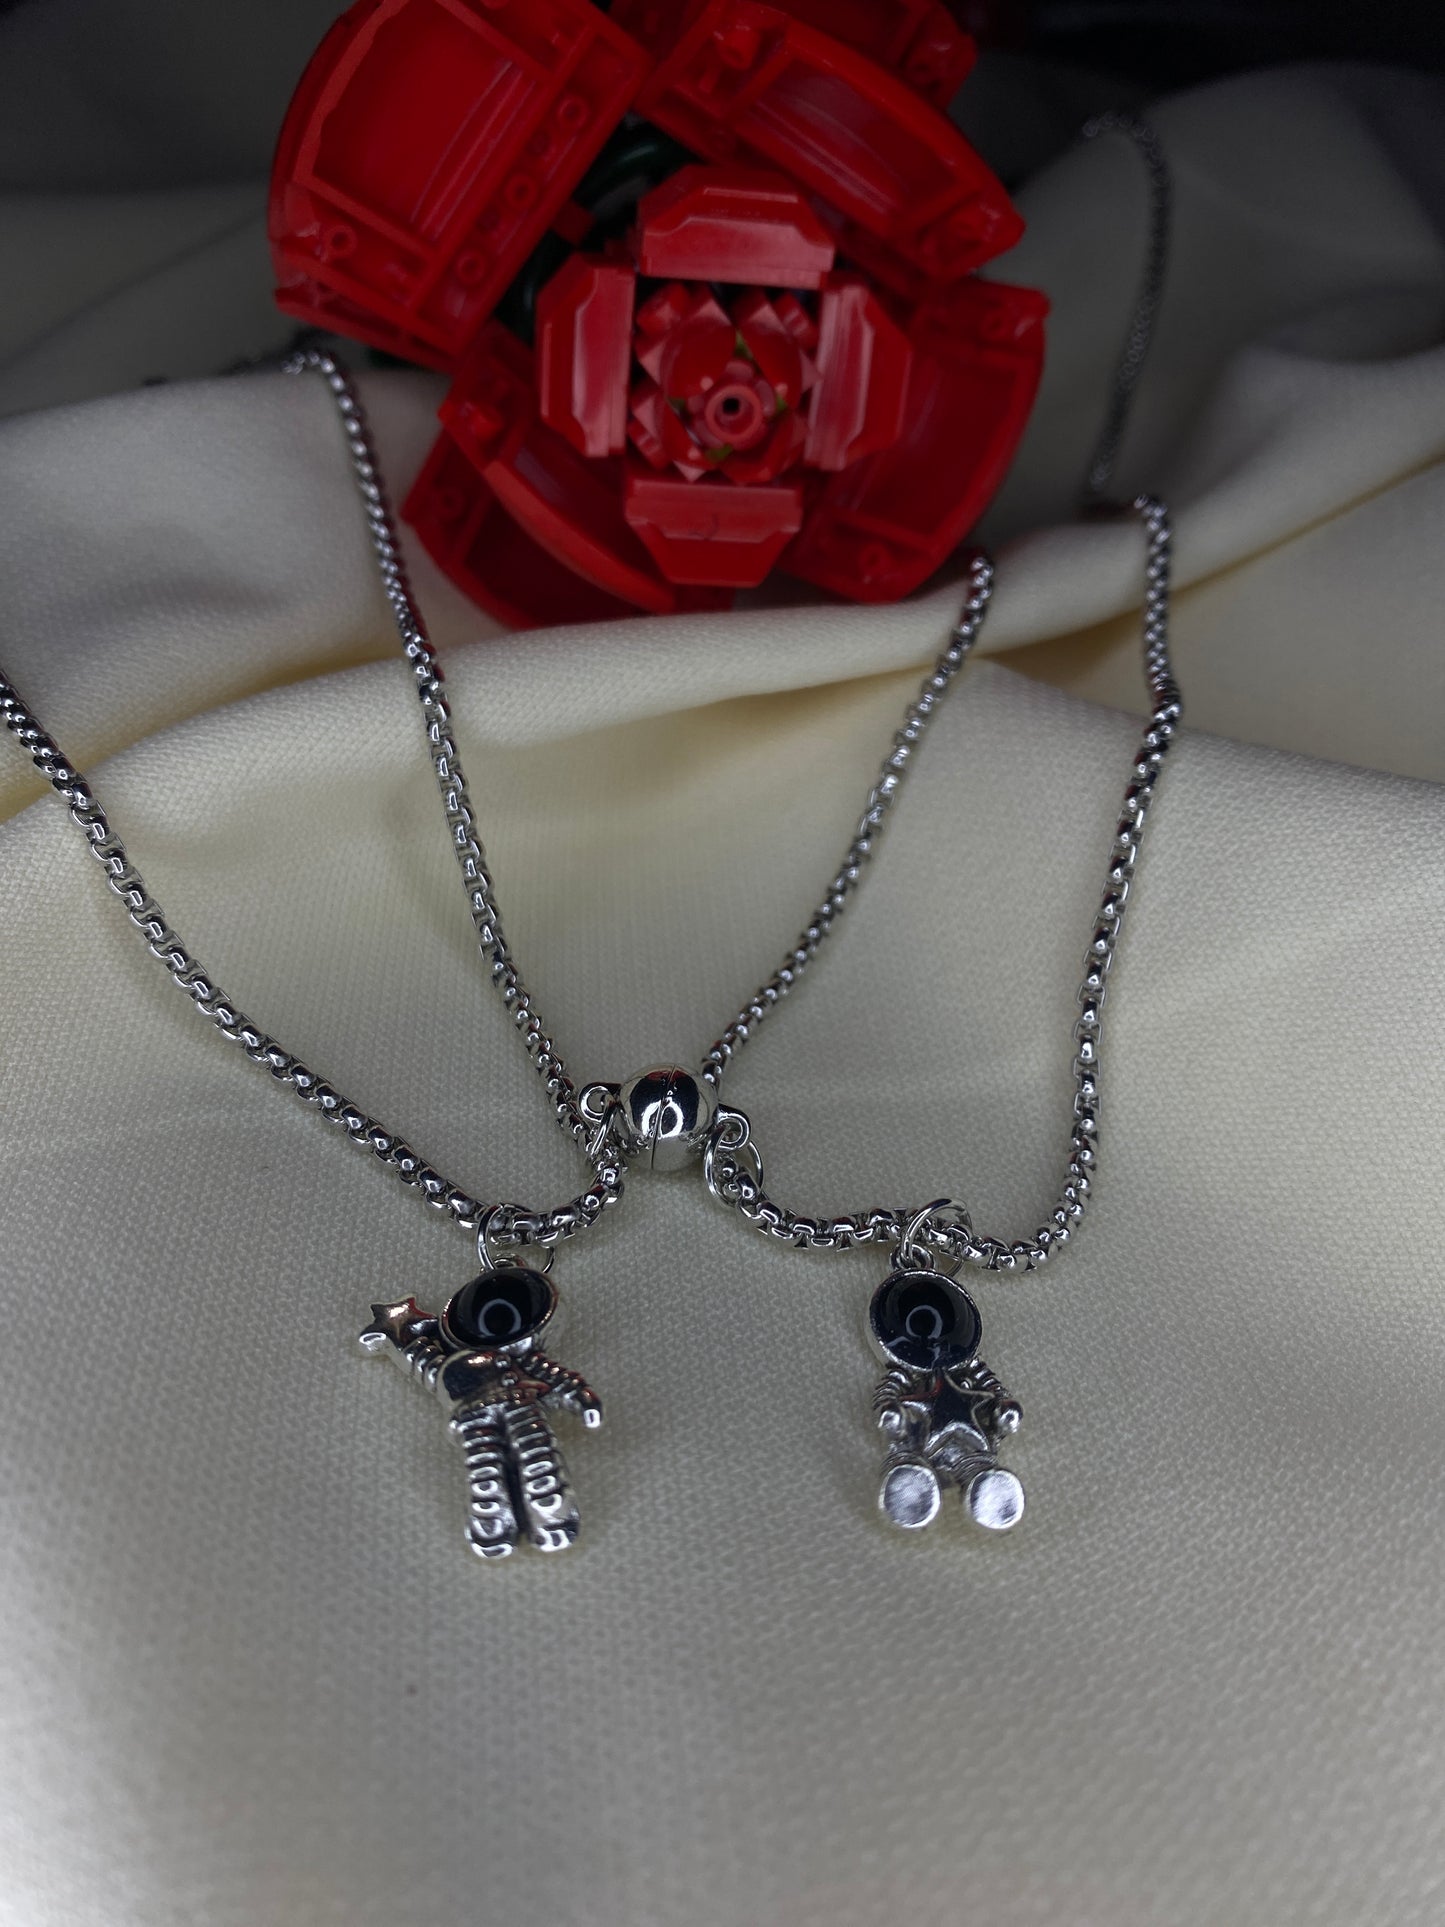 Matching Astro Necklace